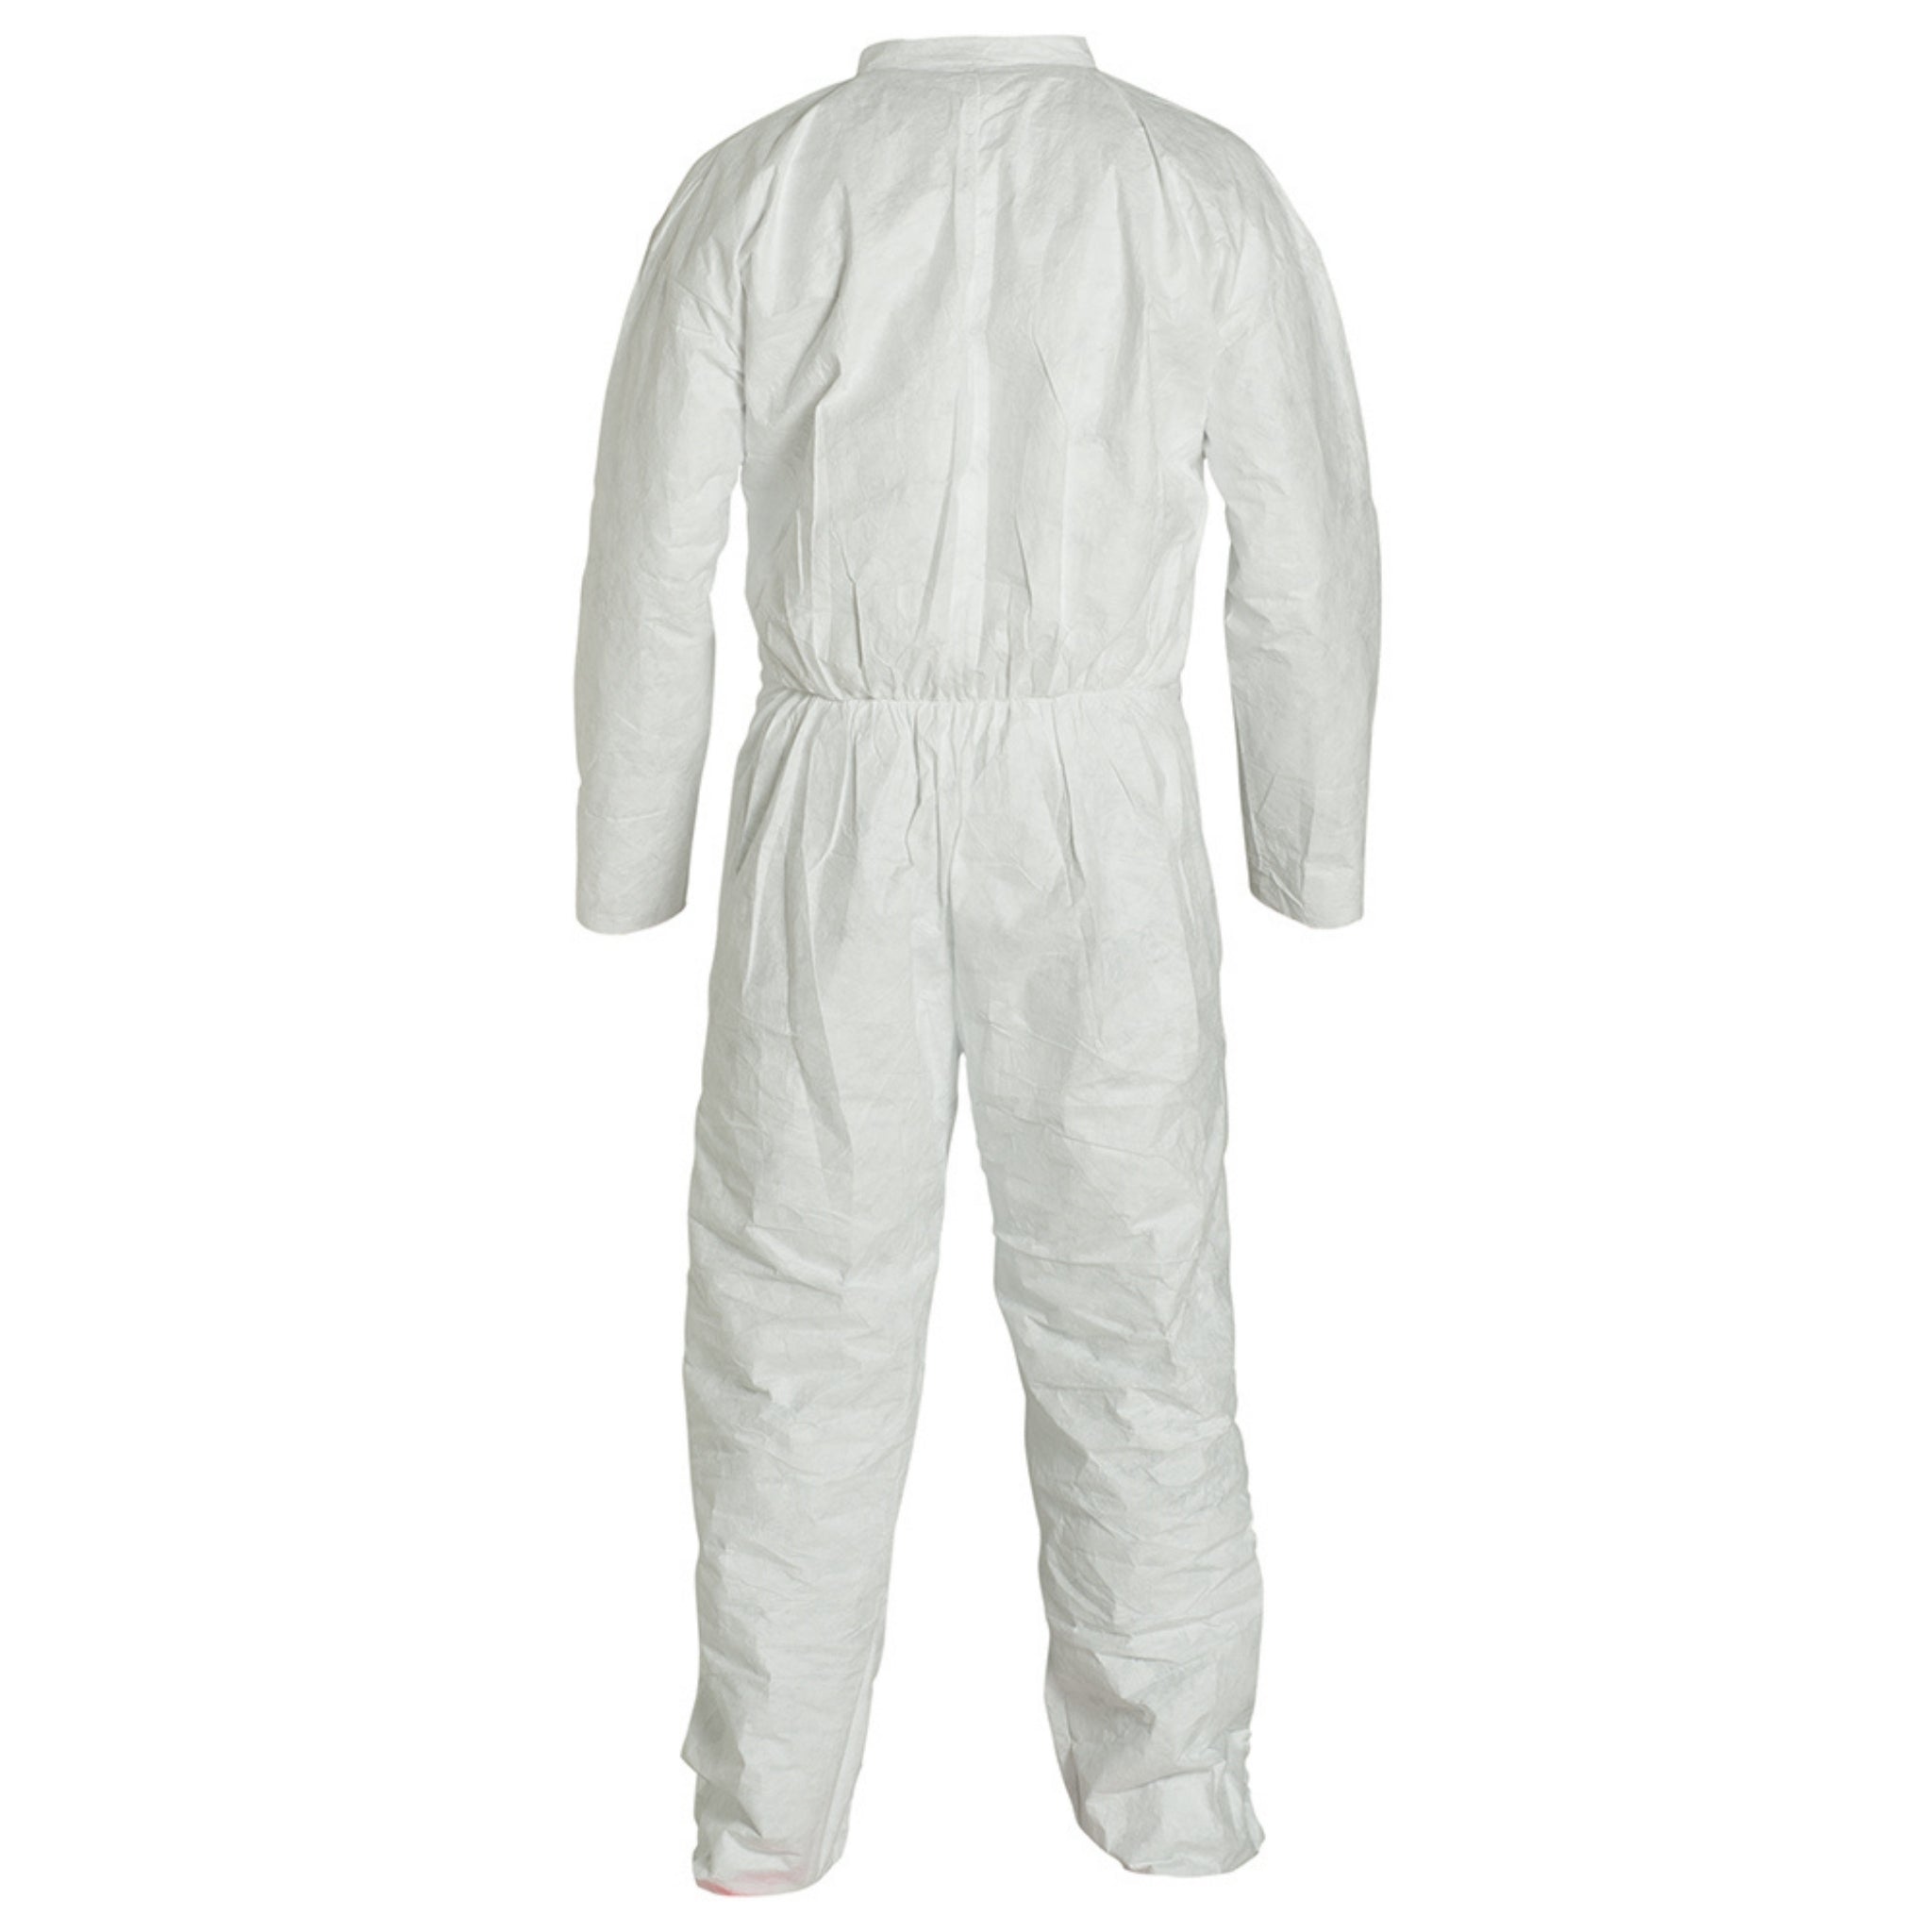 DuPont TY120S-1 Suit: Tyvek 400  Disposable Protective Coverall, White